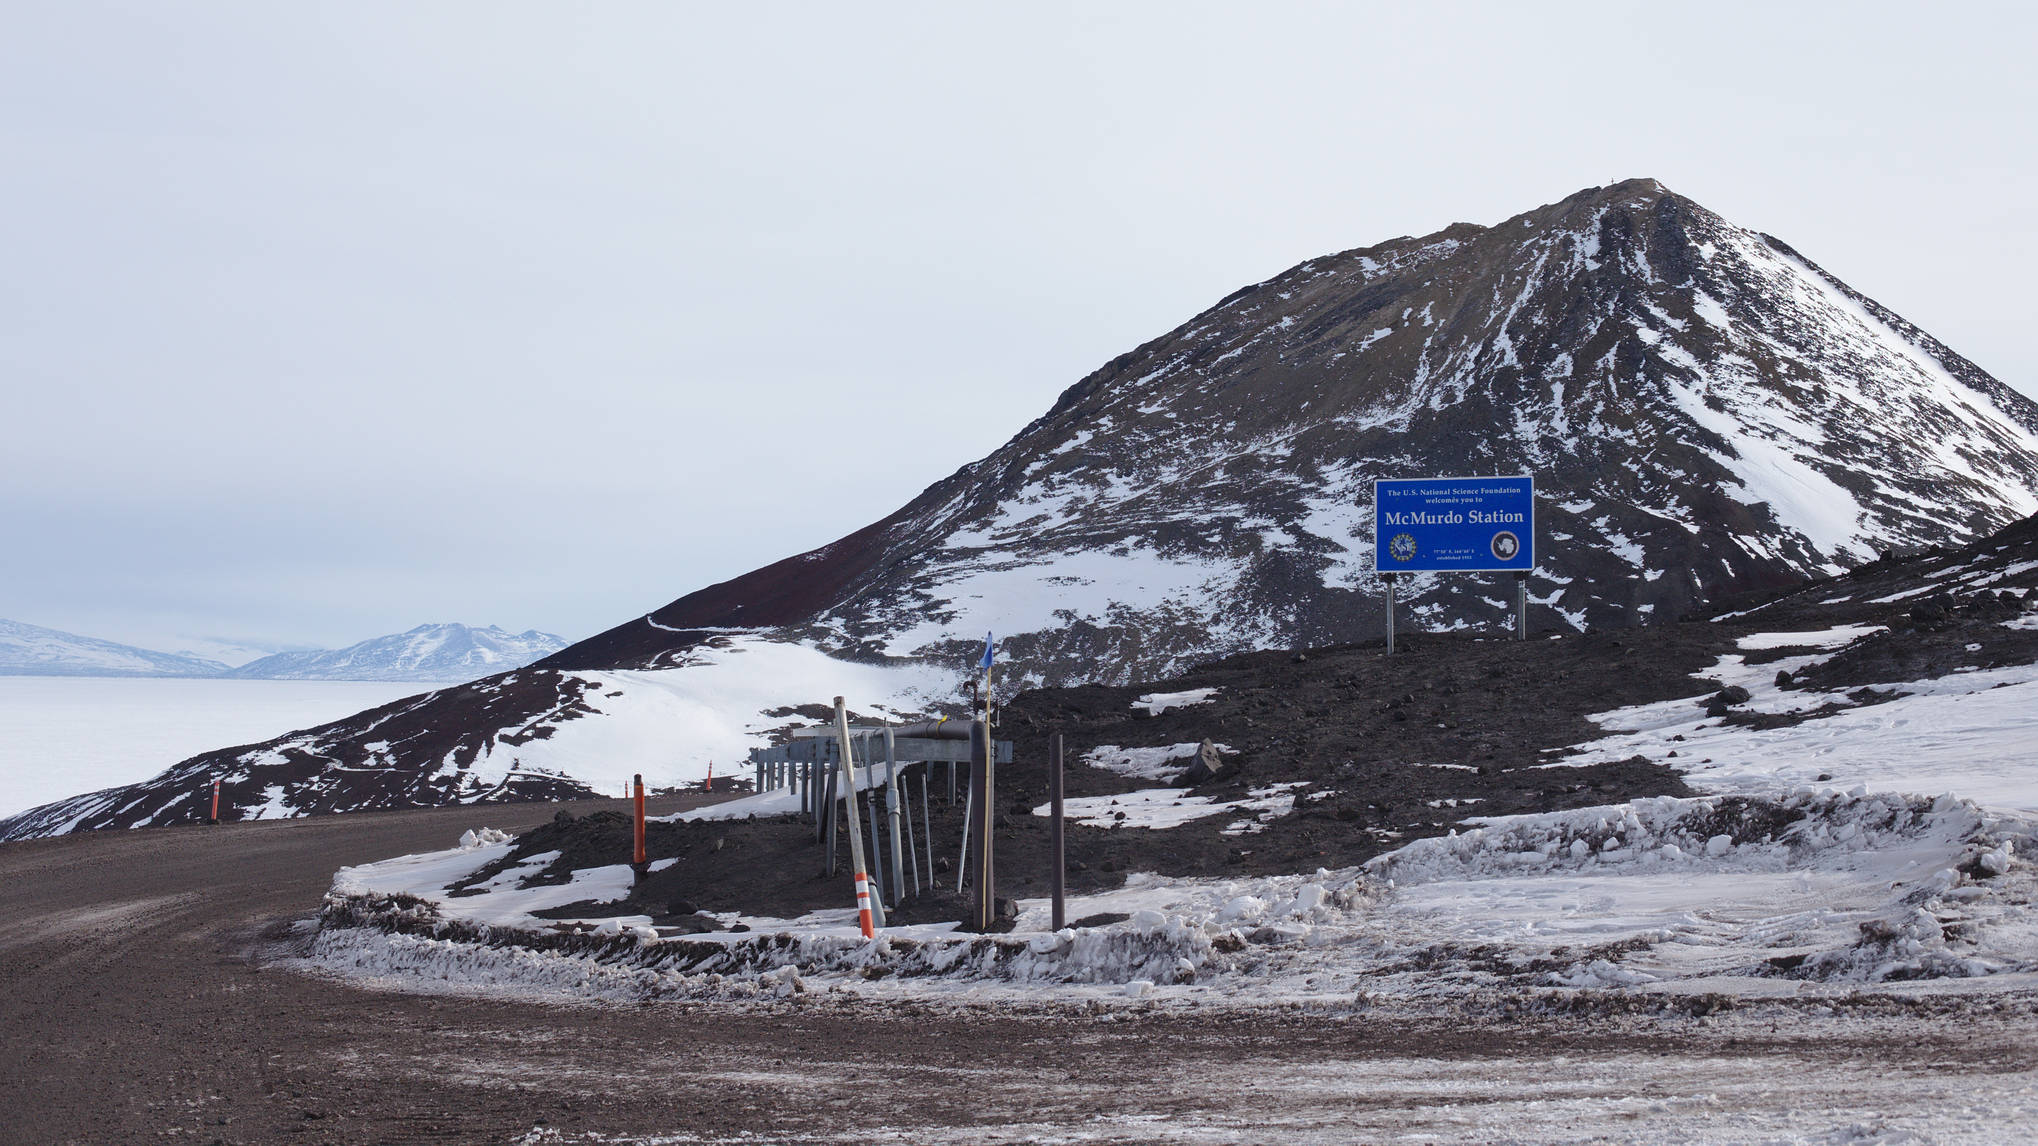 One step closer to home - the road to McMurdo